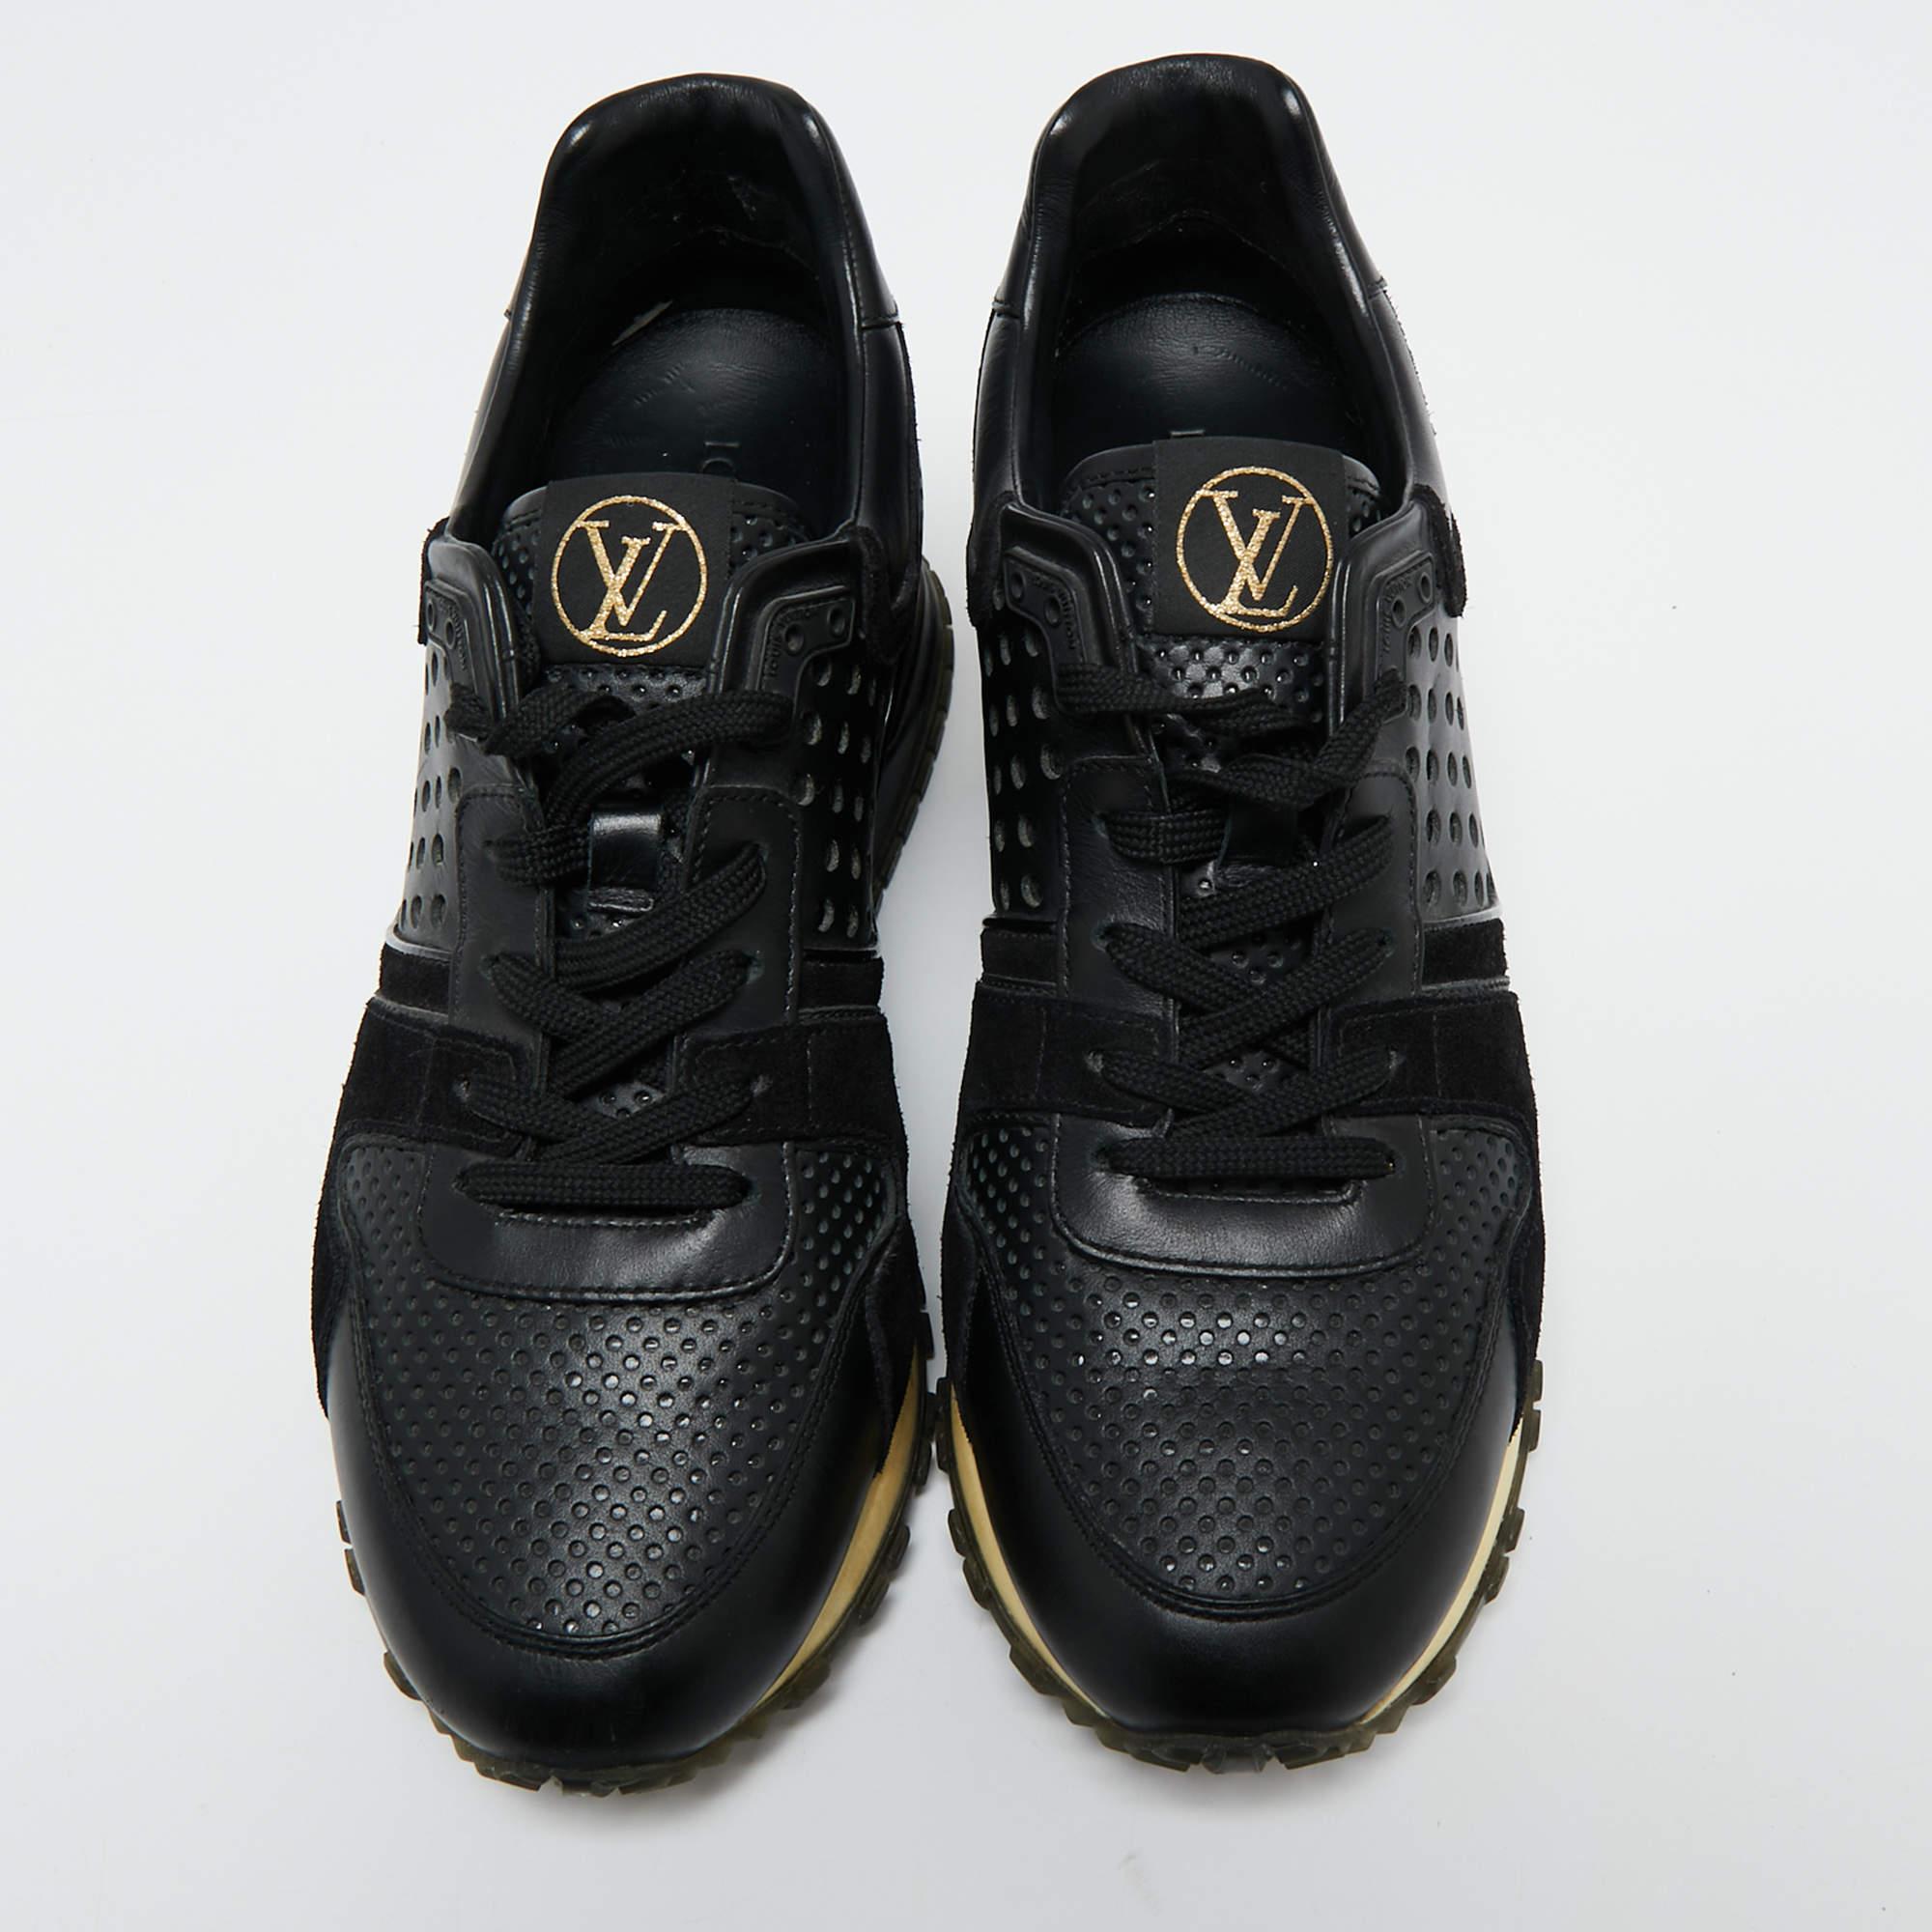 Louis Vuitton Black Perforated Leather and Suede Run Away Sneakers Size 38 1